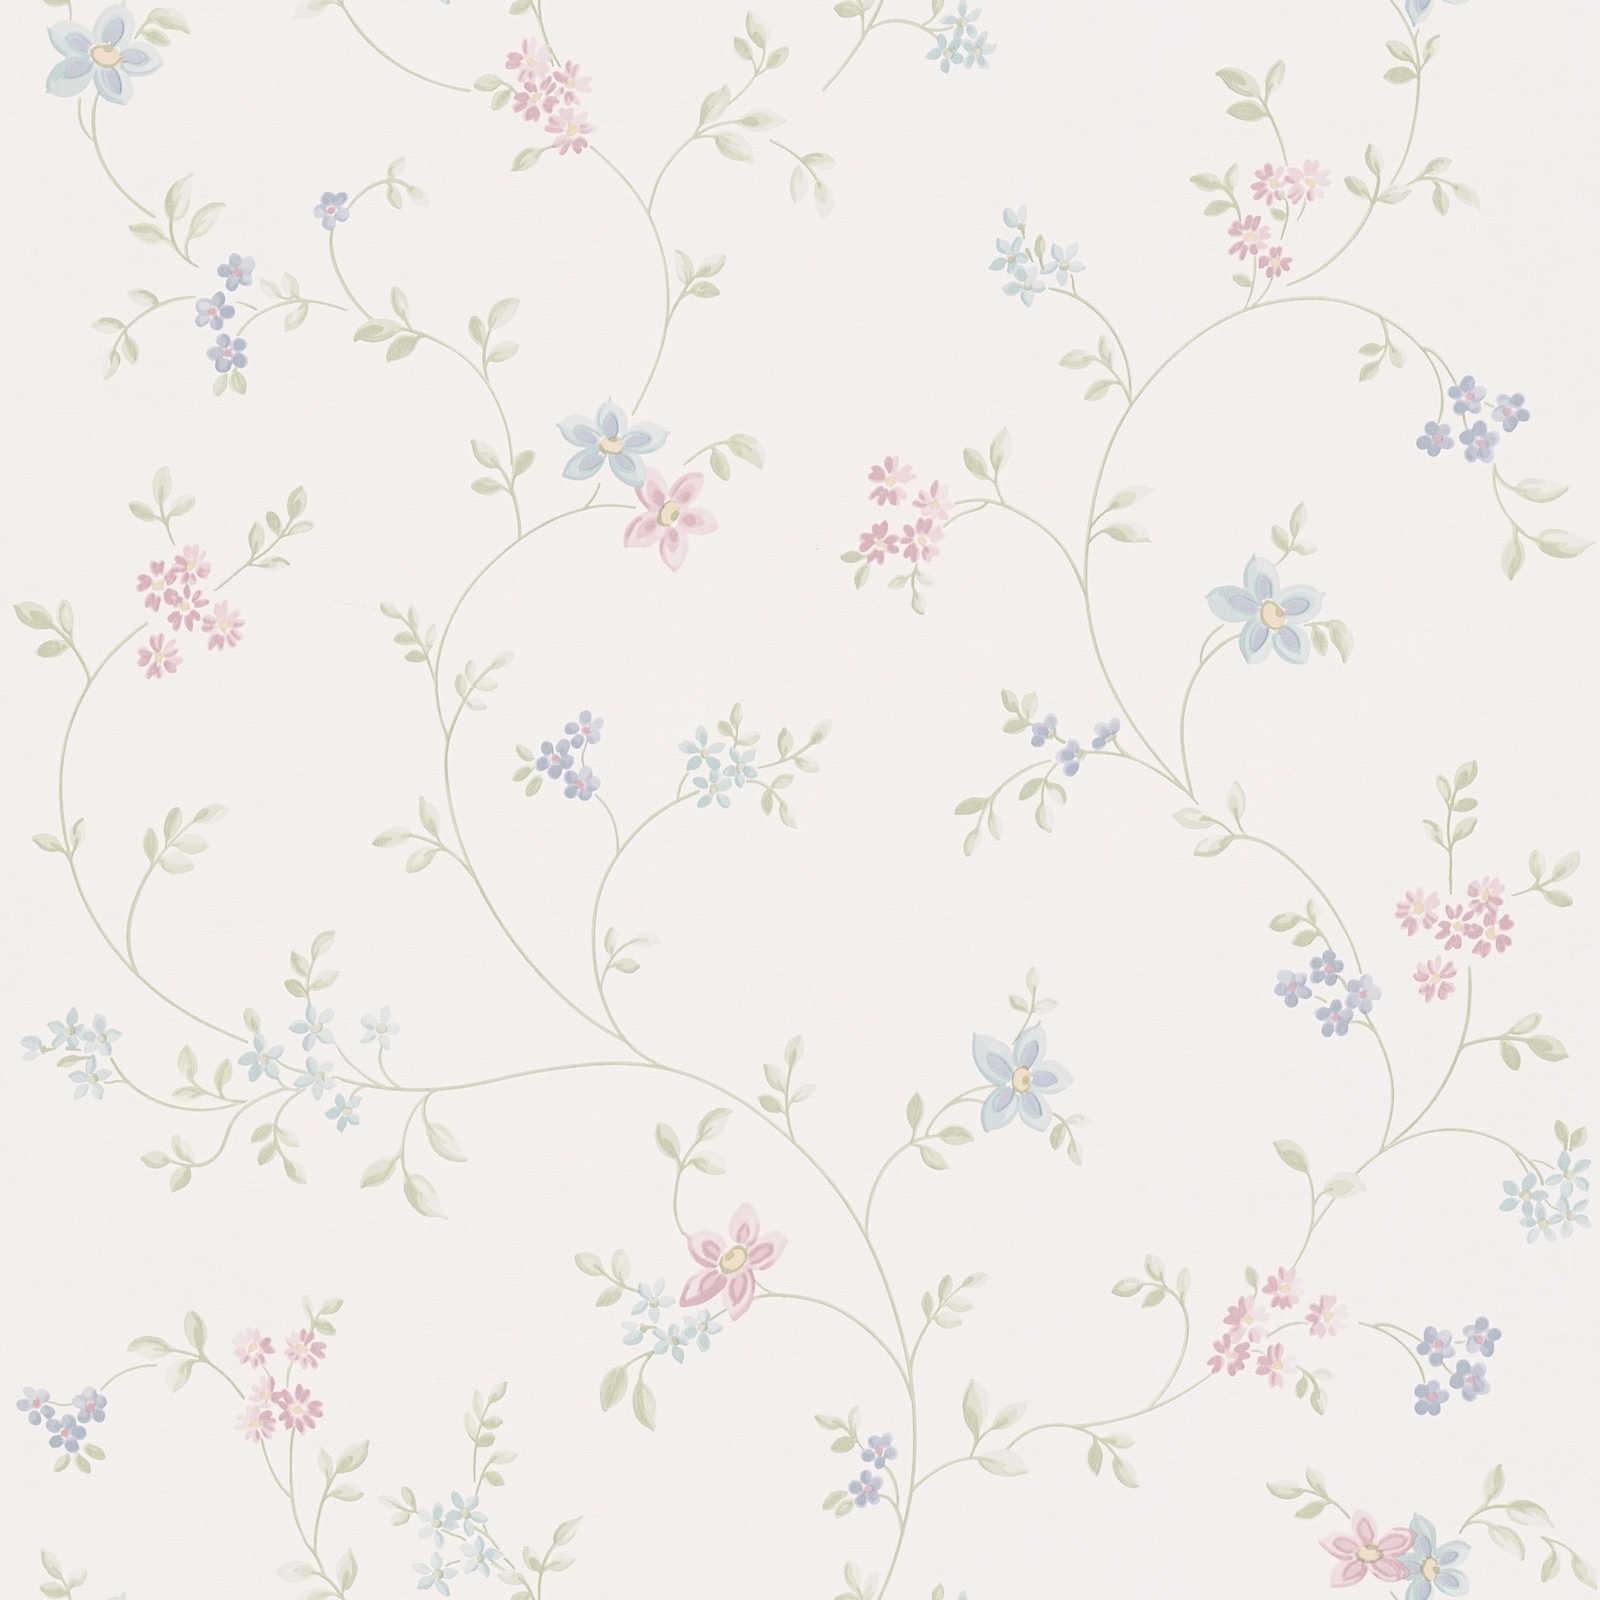         Floral wallpaper with vines in country style - cream, green, blue
    